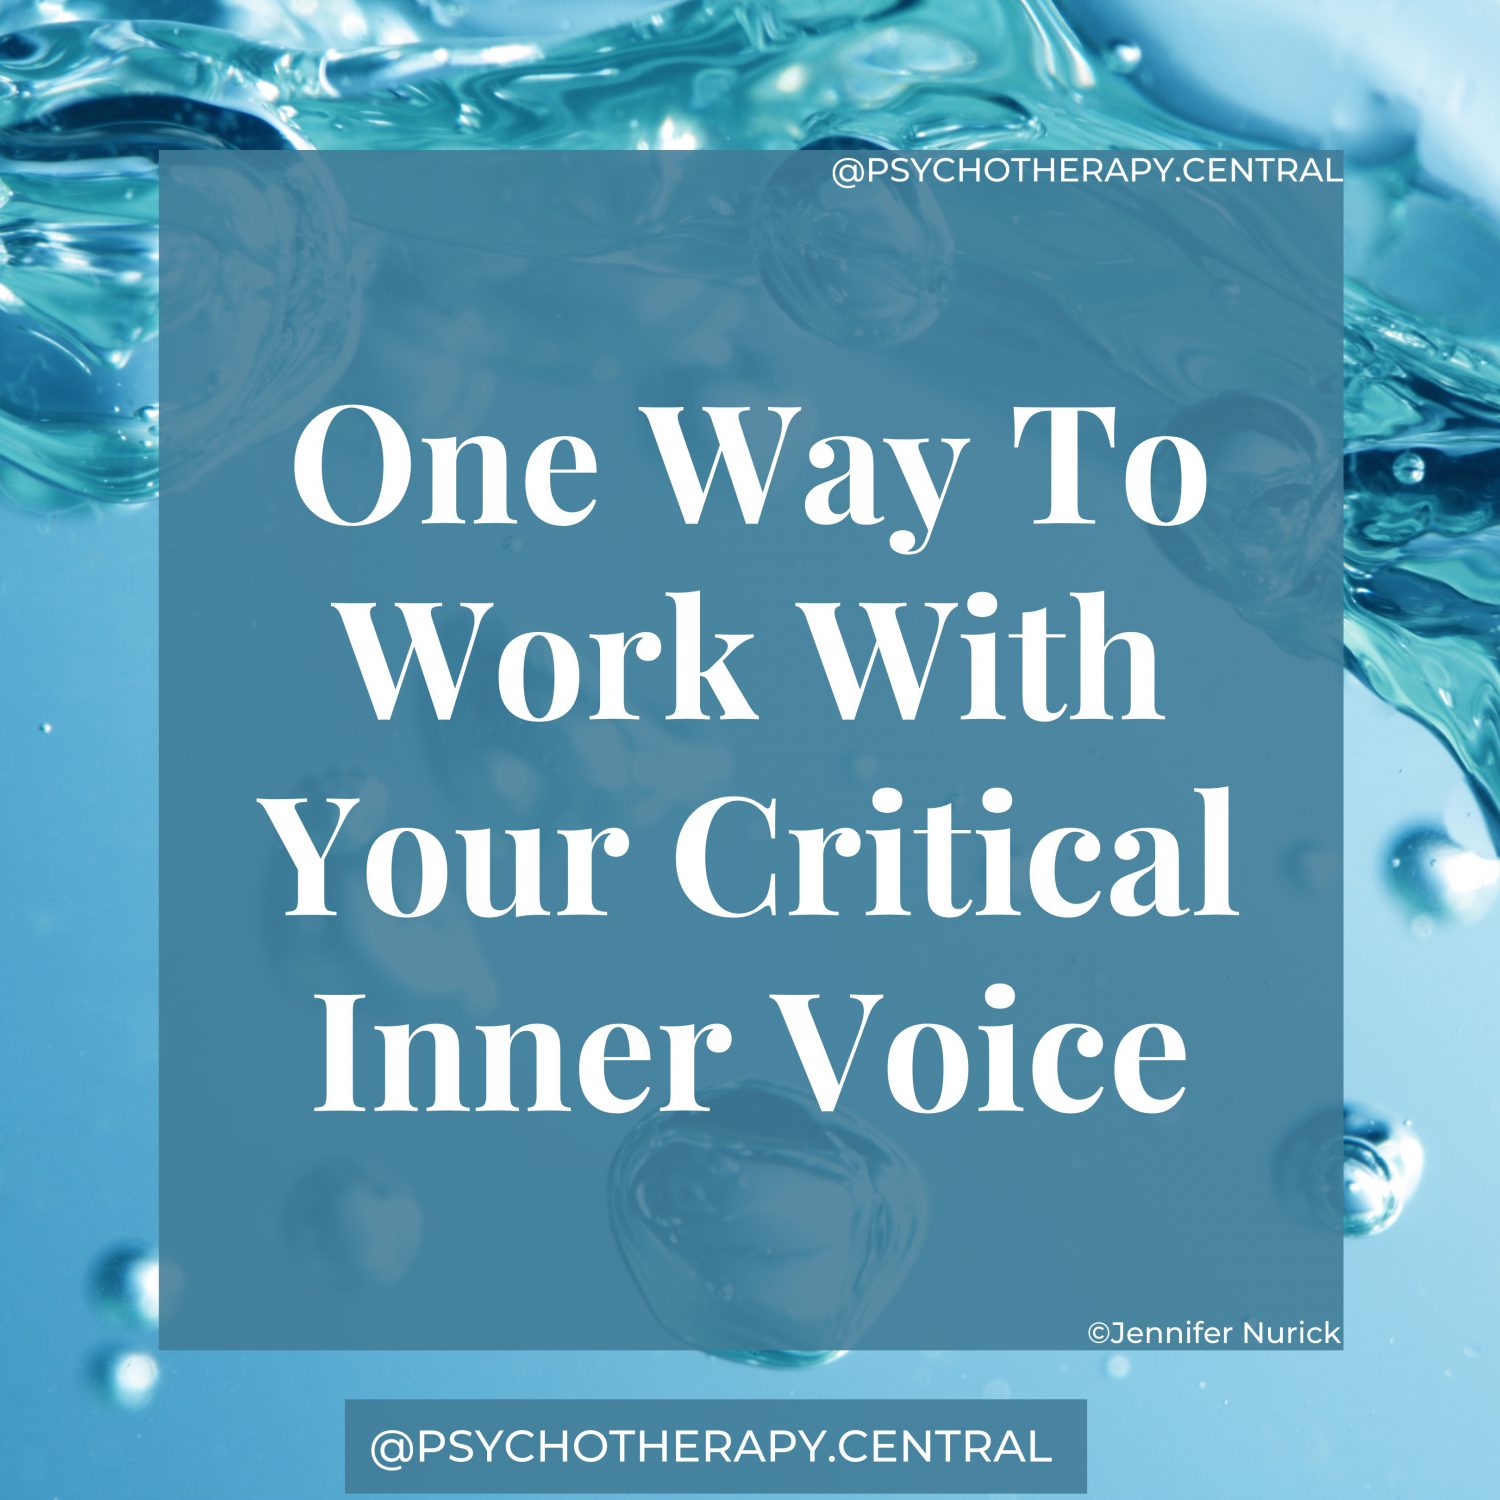 One Way To Work With Your Critical Inner Voice